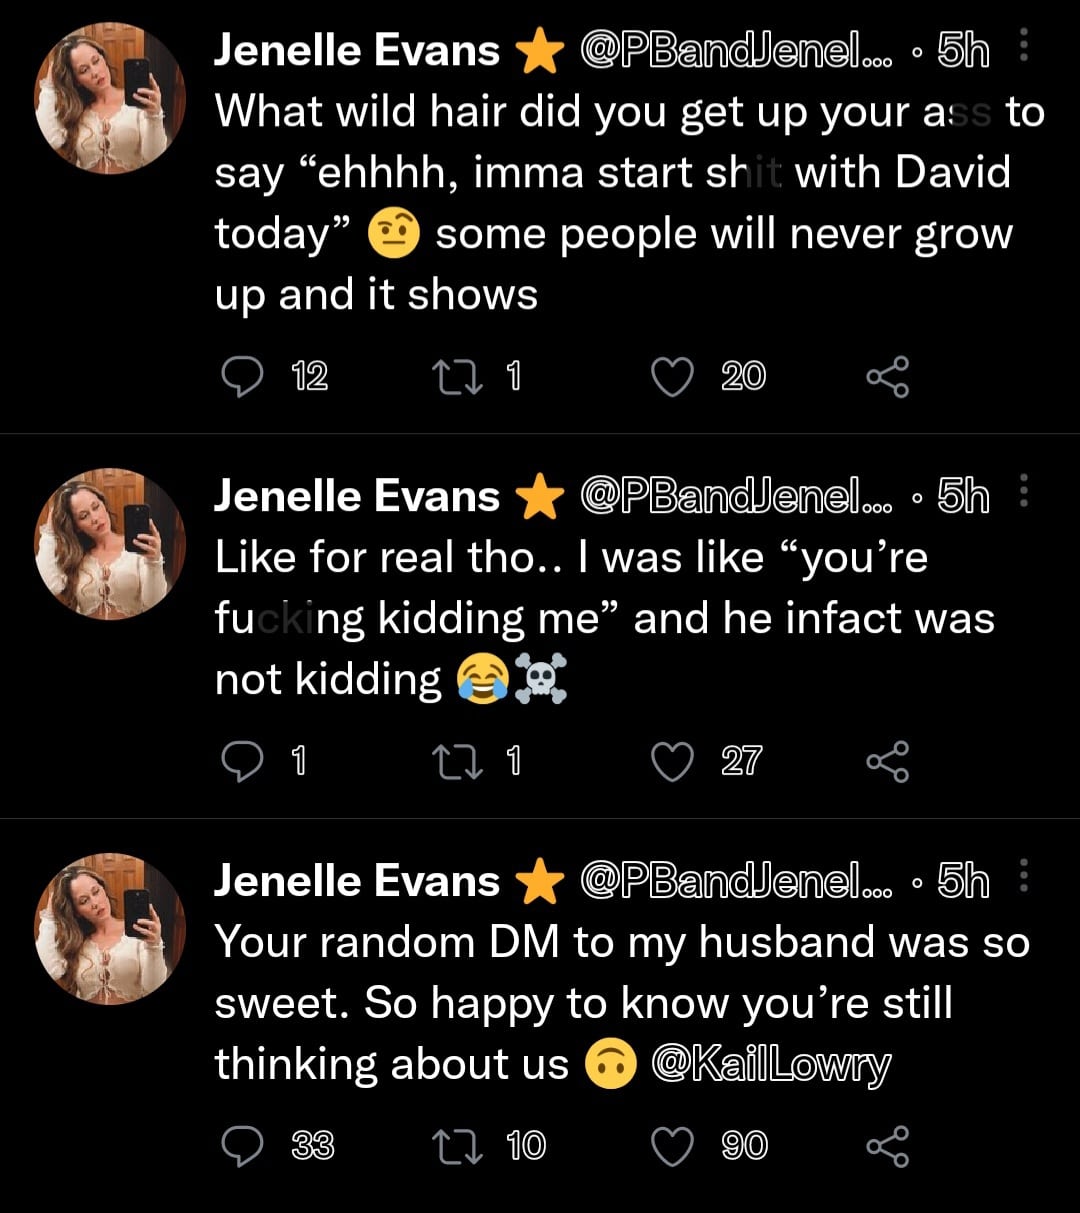 jenelle evans accused kailyn lowry of dm'ing her husband david eason